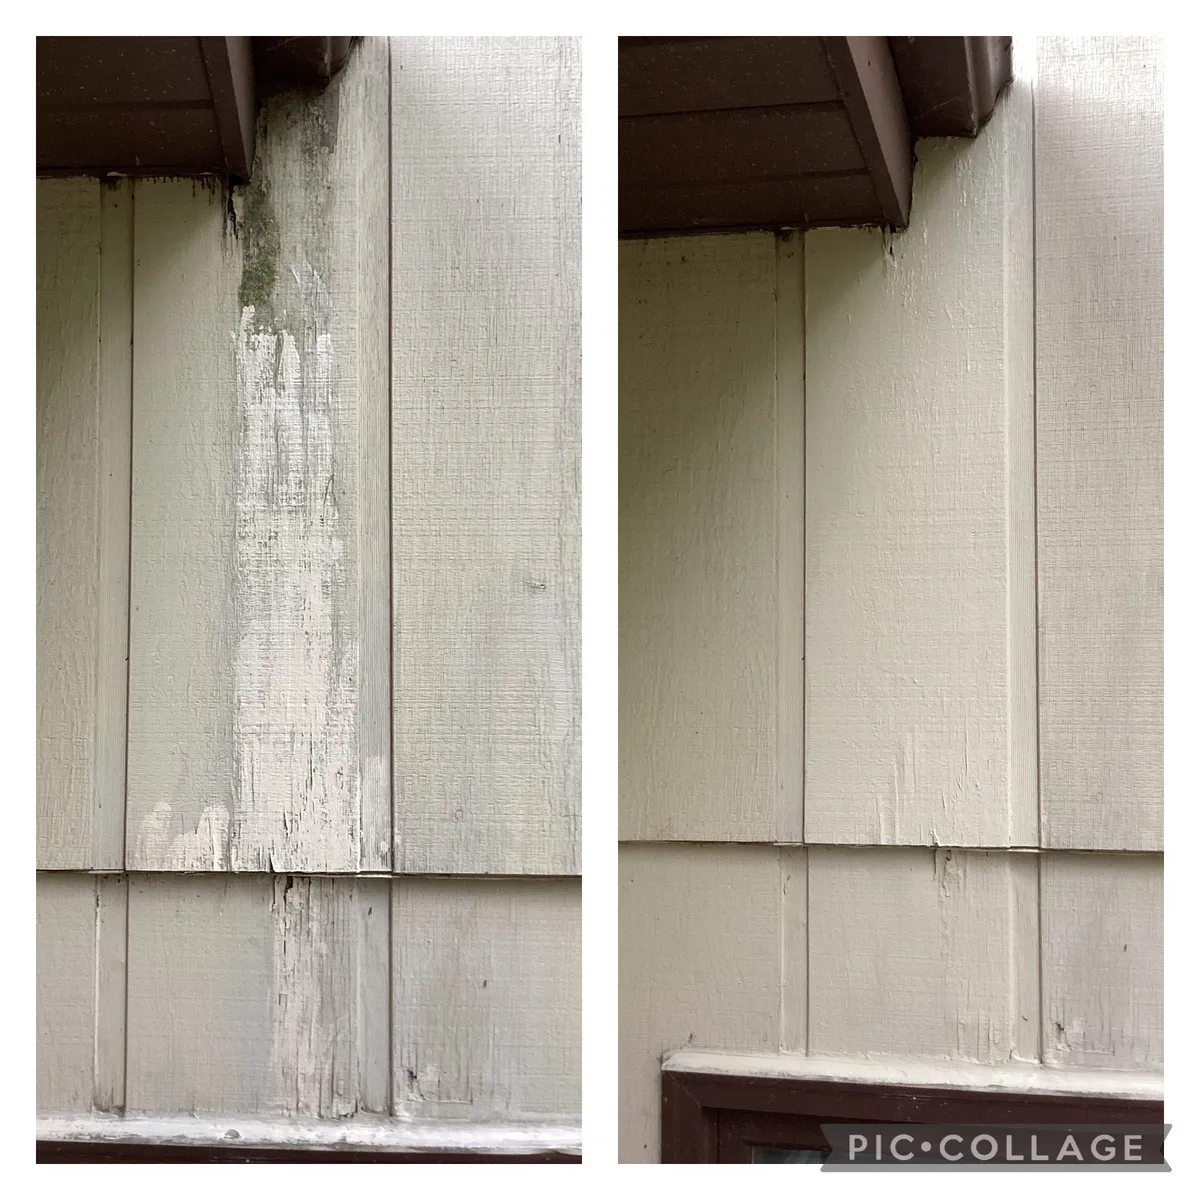 Siding wood rot repair service during property maintenance in Dupage County, including painting